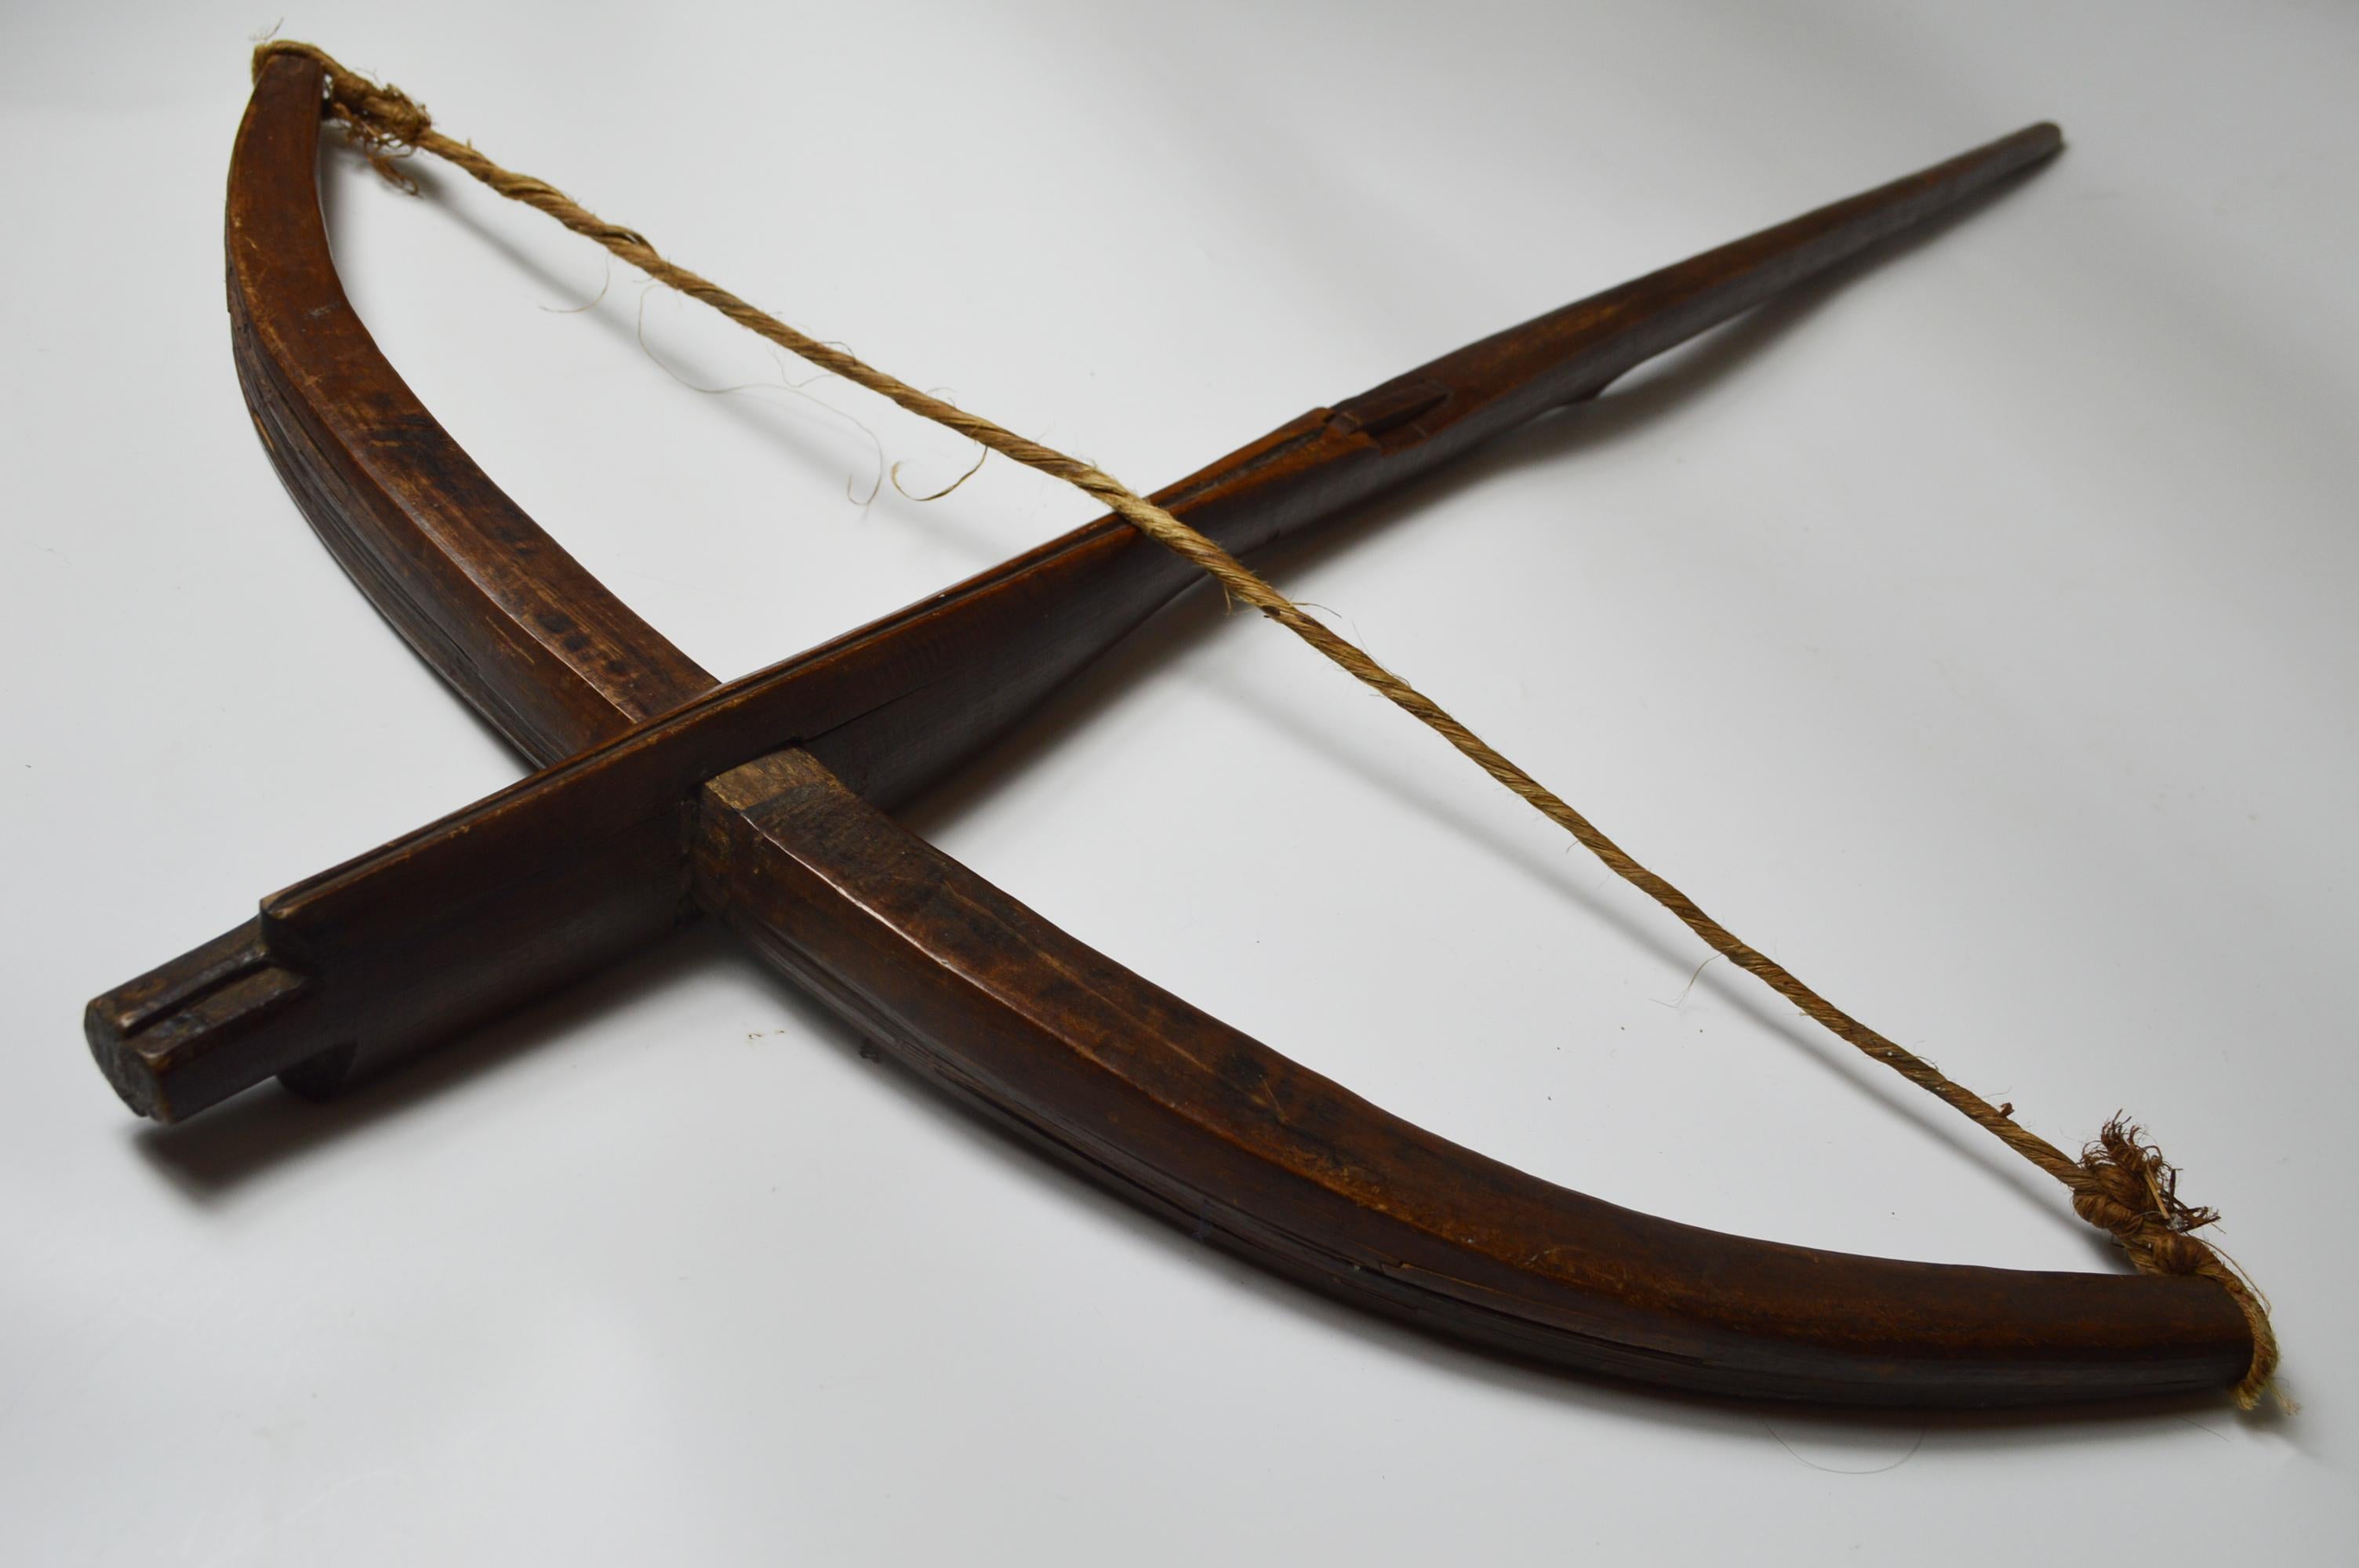 African tribal antique fang wood cross bow
Superb old fang hard wood cross bow
Superb example
Measures: Length 102 cm, width 46 cm
Condition: Age wear overall good
Ex UK collection
Period late 19th-early 20th century
Fang tribe